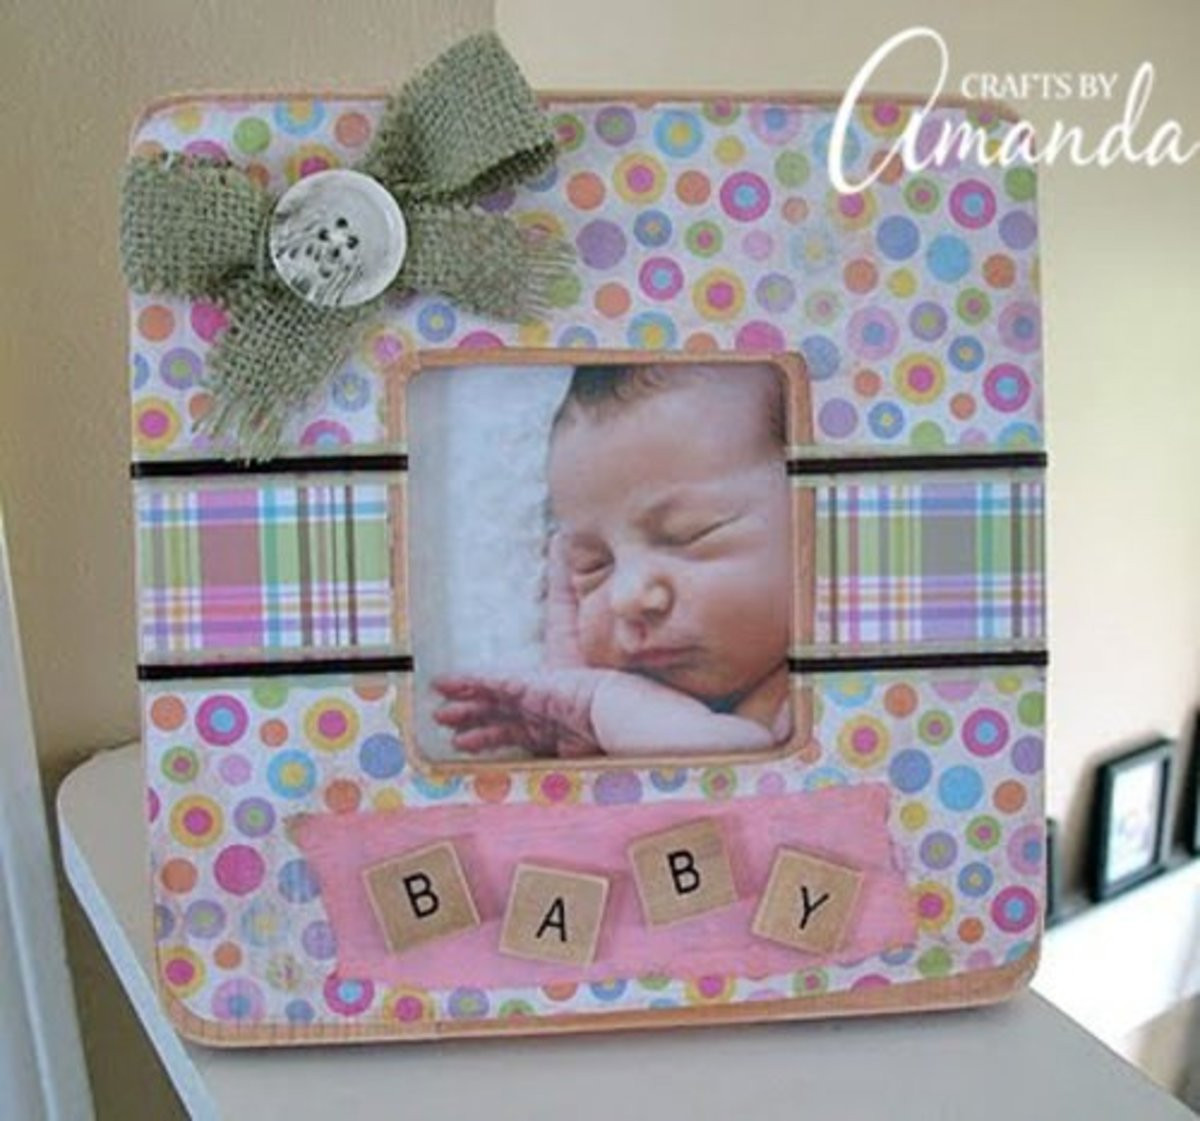 Baby Picture Gift Ideas
 50 Darling Homemade Gift Ideas to Make for a New Mom